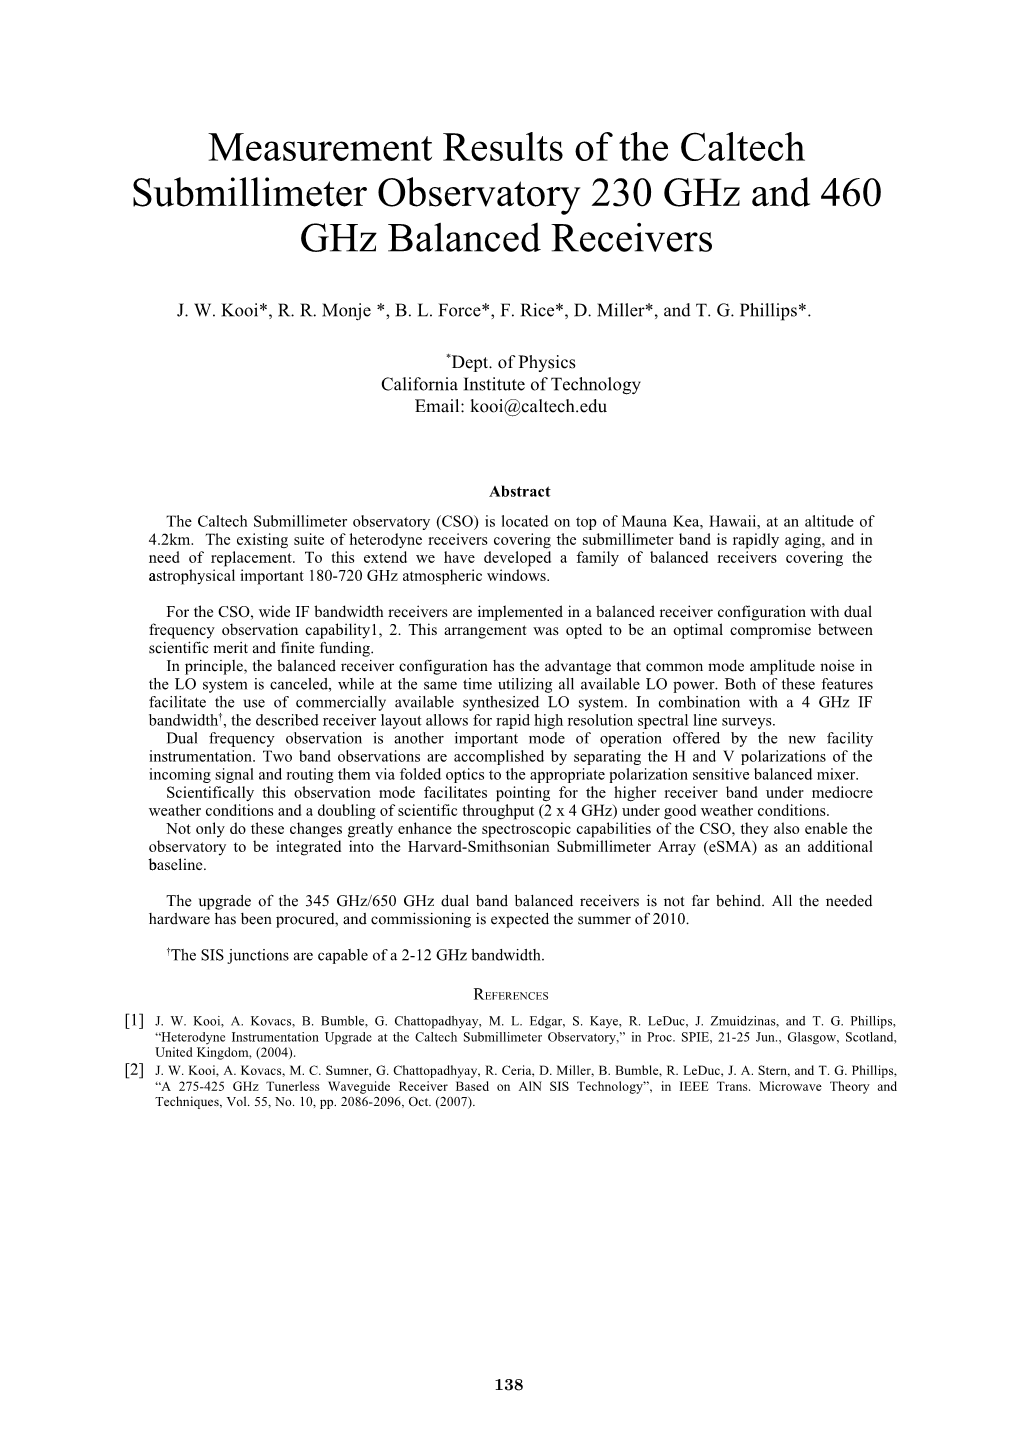 Measurement Results of the Caltech Submillimeter Observatory 230 Ghz and 460 Ghz Balanced Receivers